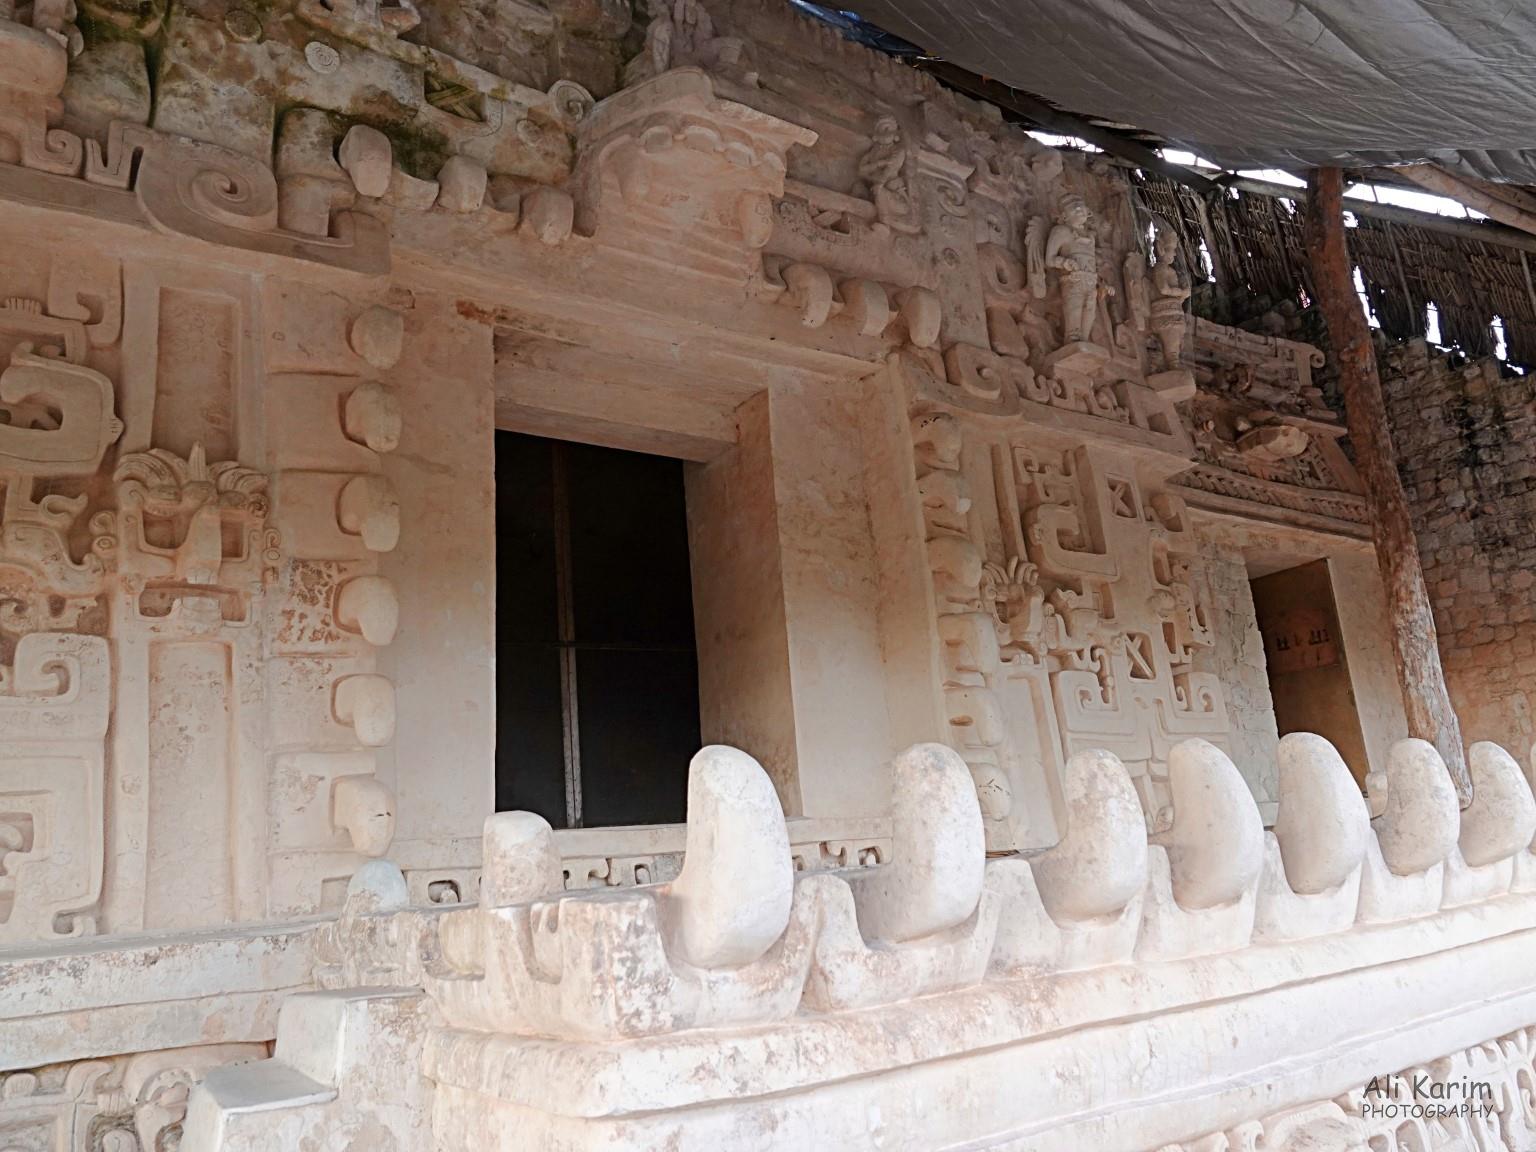 Valladolid, Yucatan, Mexico Feb 2021, Amazing intricate carvings by the Mayans so many years ago in process of being restored & preserved